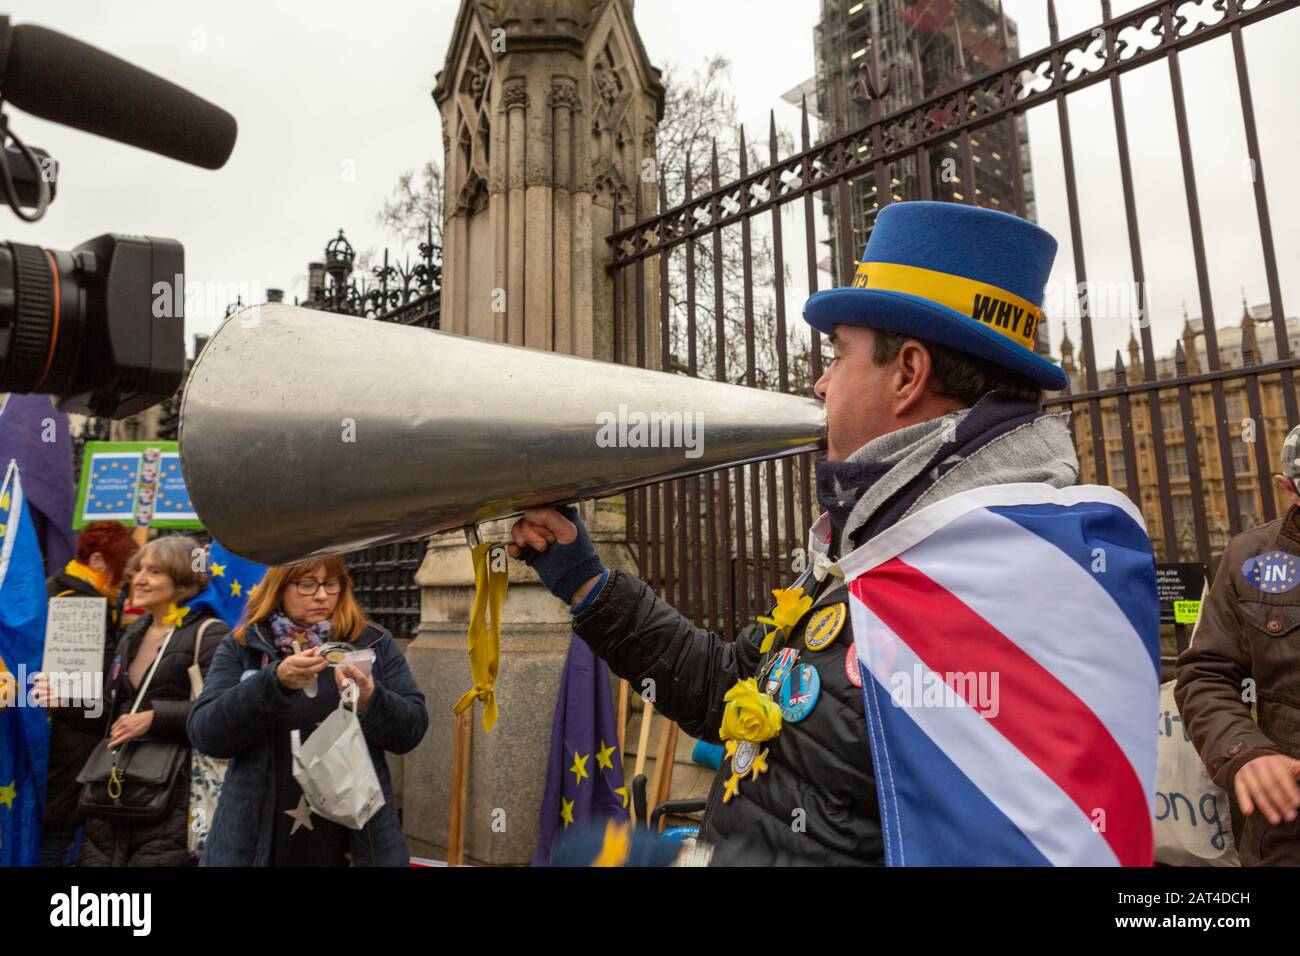 Westminster, UK. 30th Jan, 2020. Mr Stop Brexit, Steve Bray, outside the Houses of Parliament with his infamous megaphone. Penelope Barritt/Alamy Live News Stock Photo